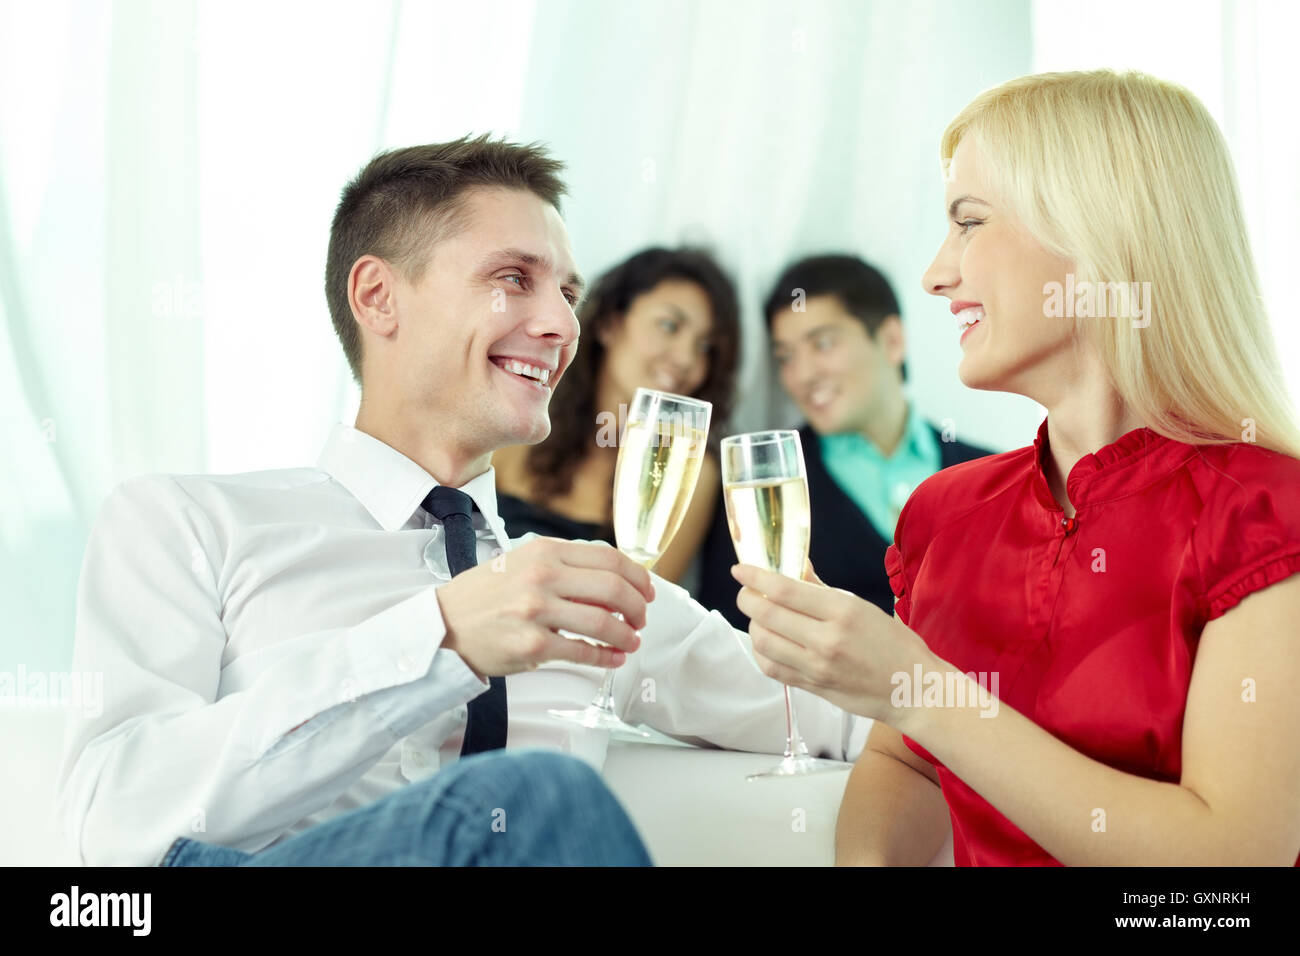 Toasting at party Stock Photo